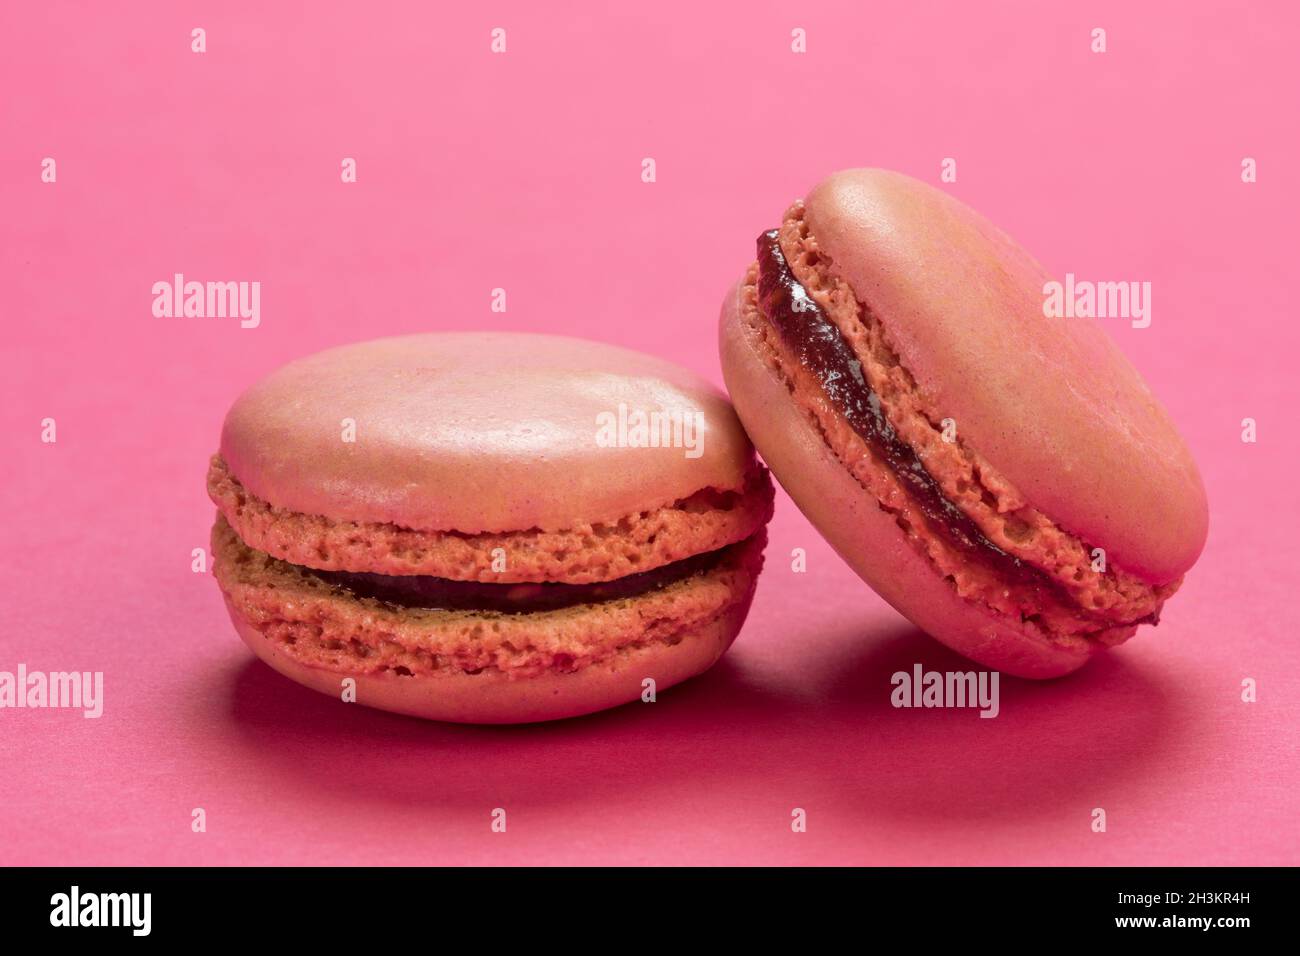 Raspberry flavor French macaron cookies closeup on background of a similar pastel pink colour Stock Photo